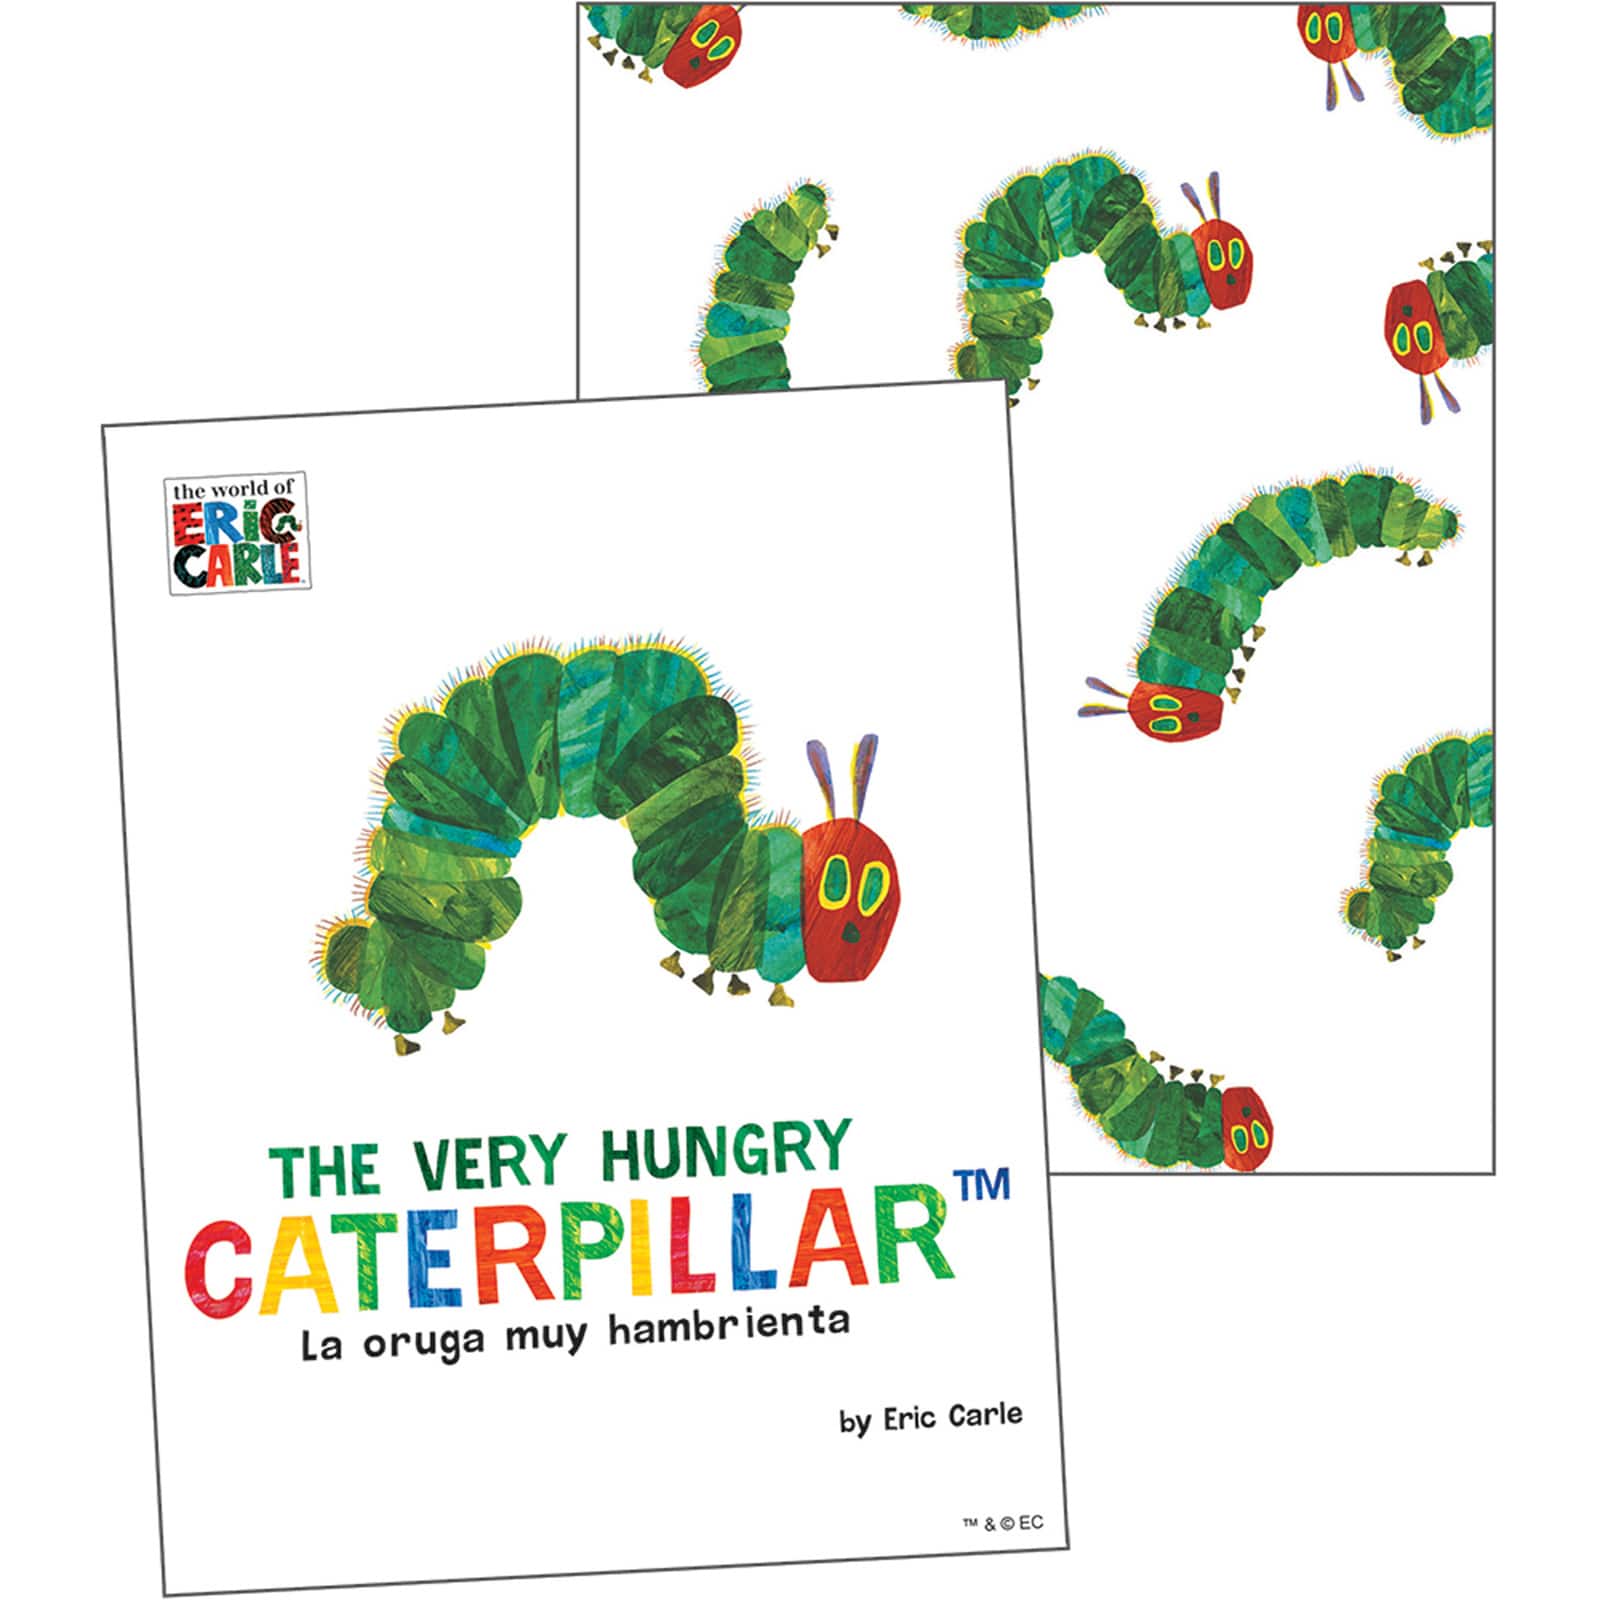 PACK OF 6 ERIC CARLE POSTCARDS THE VERY HUNGRY CATERPILLAR SET NEW WORDS CAKE 